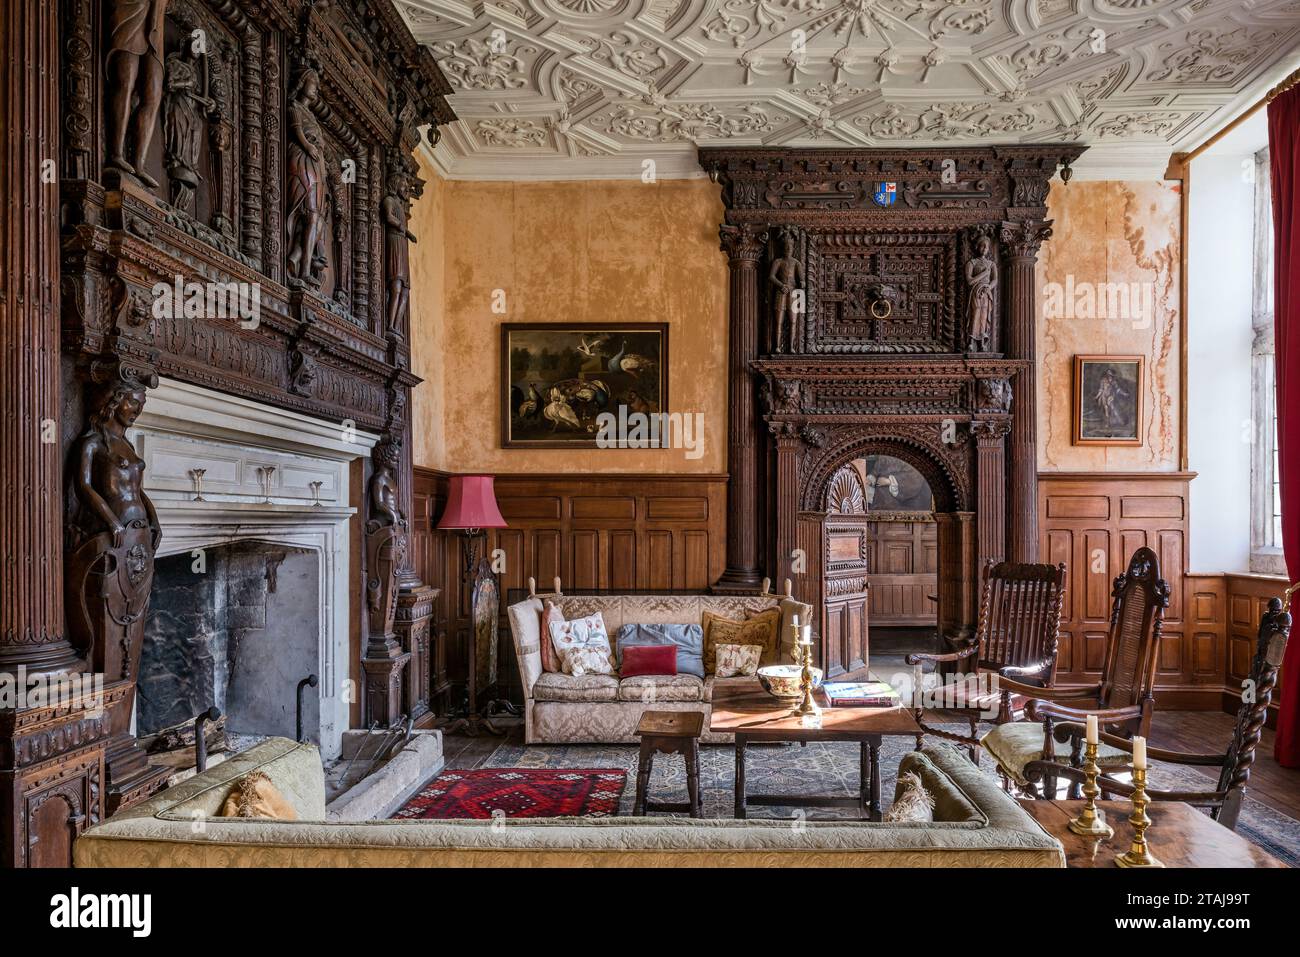 Dramatic carved chimney breast dating c1580s with plasterwork ceiling in drawing room at Wolfeton House, Dorset, England, UK. Stock Photo